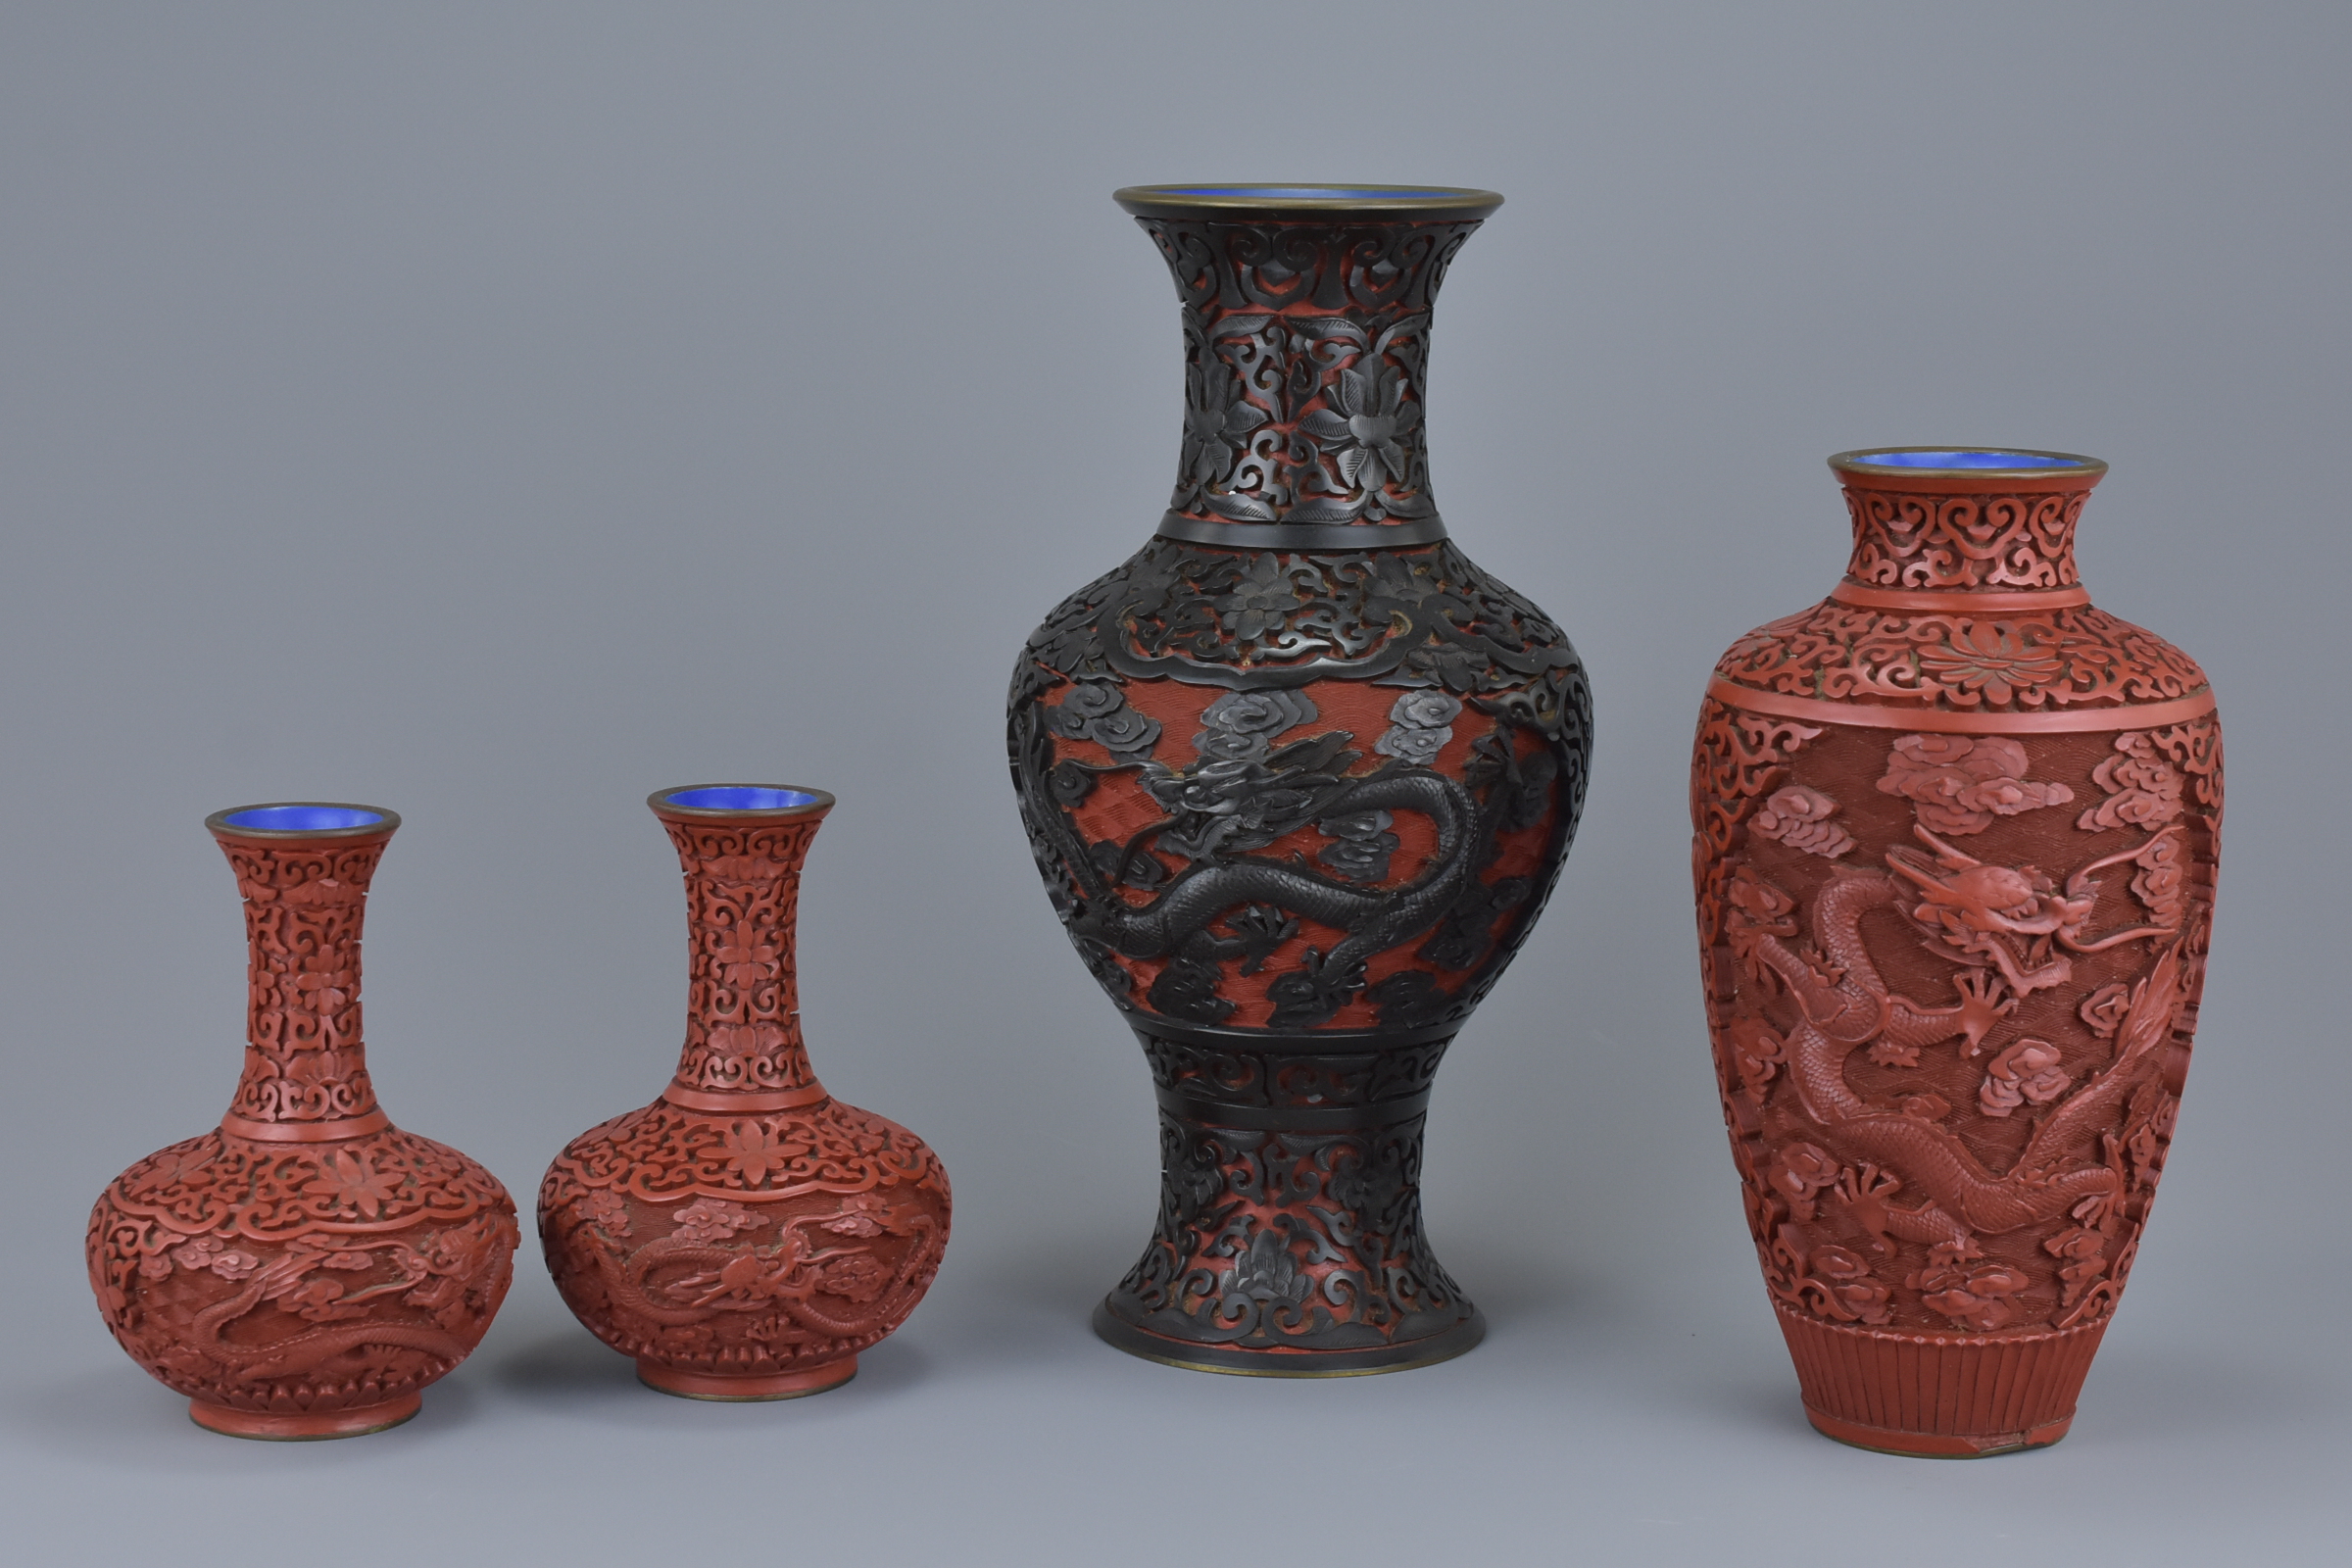 Four Early 20th century Chinese Lacquer Vases, 25cms high, 20cms high and 13cms high (4)